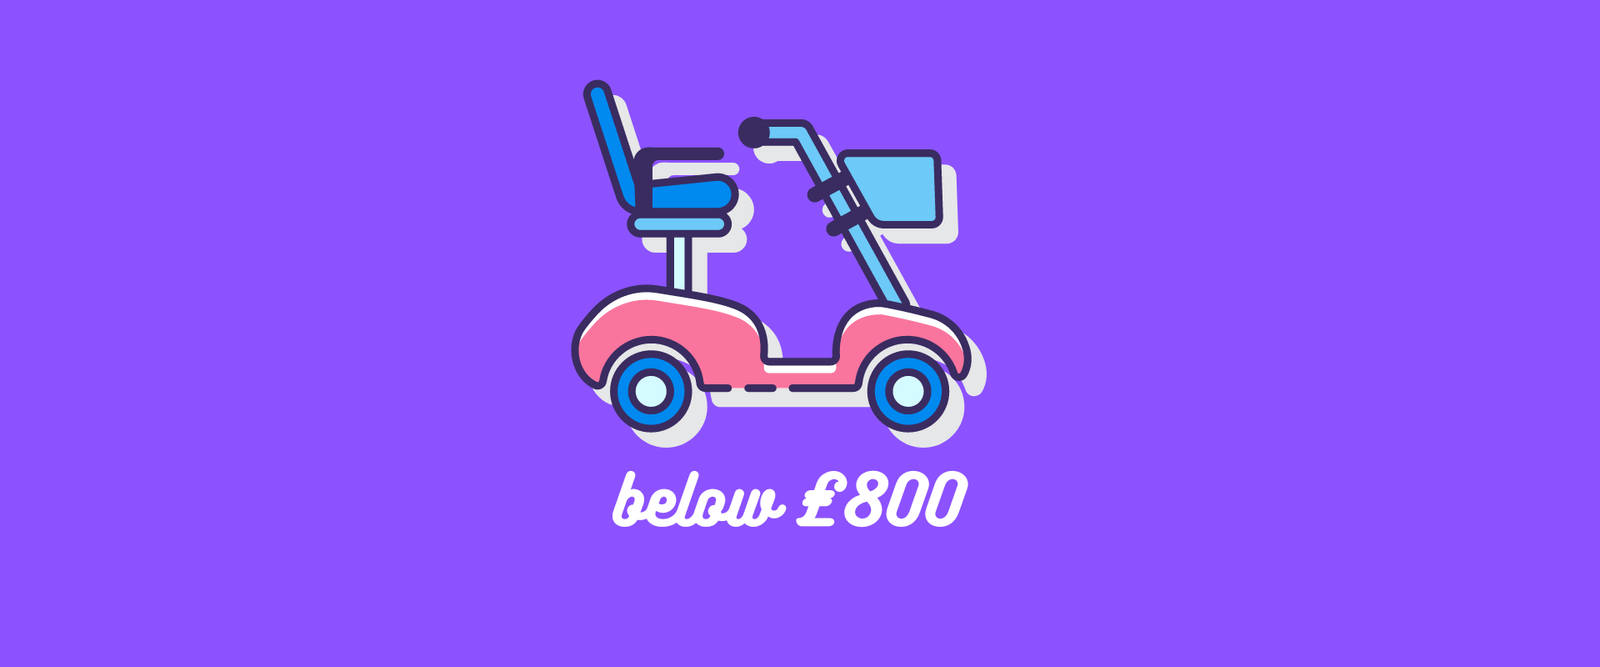 Best Mobility Scooters Under £800